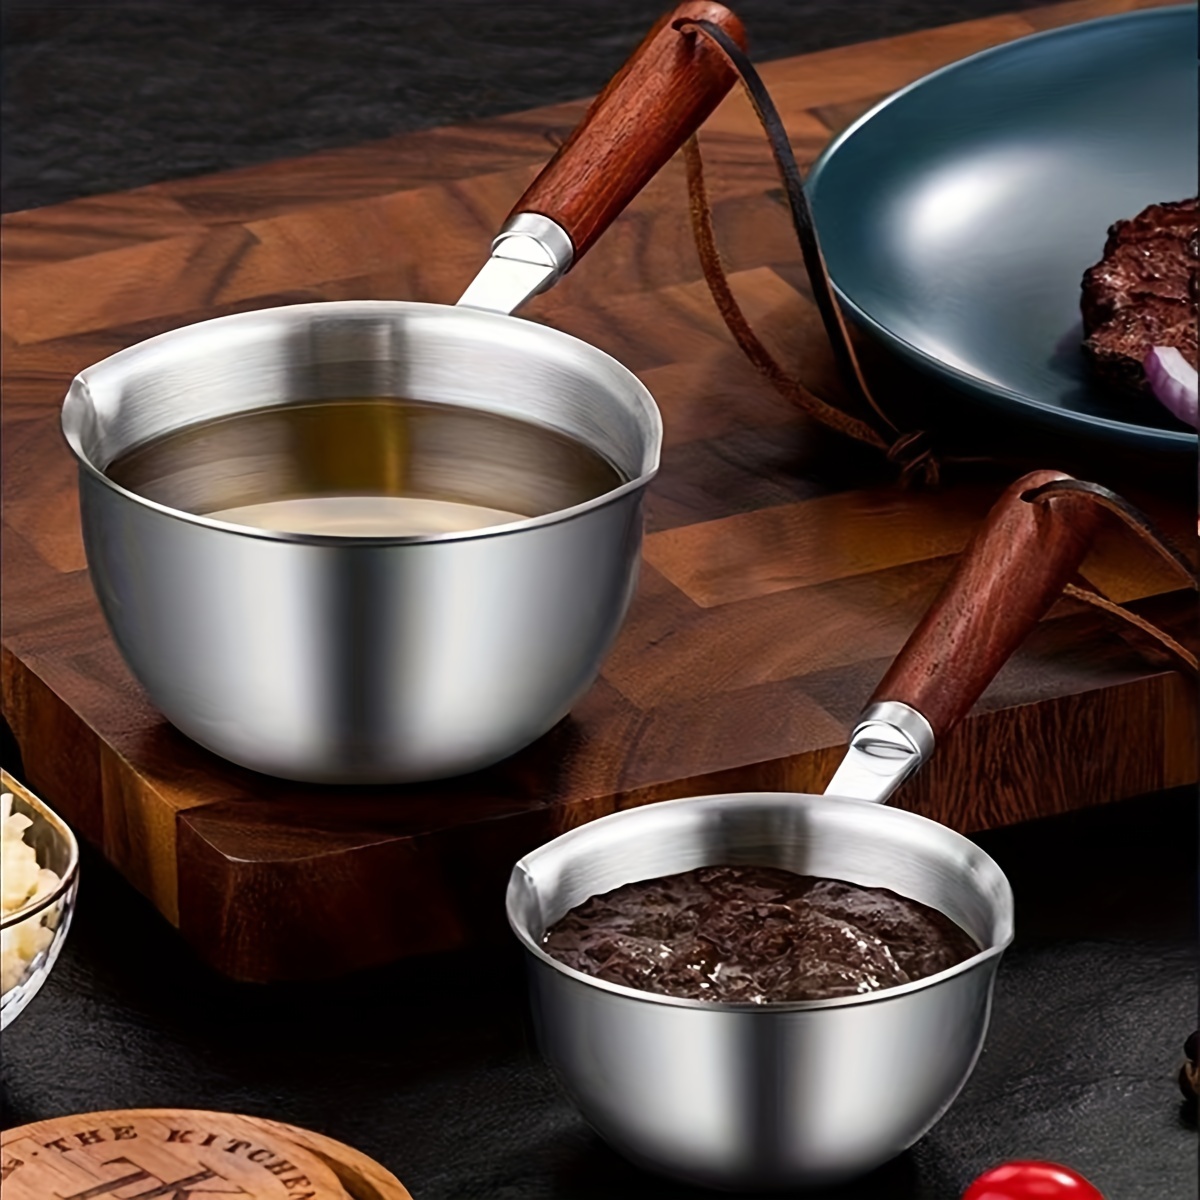  2 Pack Stainless Steel Double Boiler Pot Chocolate Melting Pot  Soap Candle Candy Making Tool Kit Wax Melting Heat Proof Bowl for Melting  Chocolate, Butter, Cheese, Caramel, Candy, Candle, Wax: Home